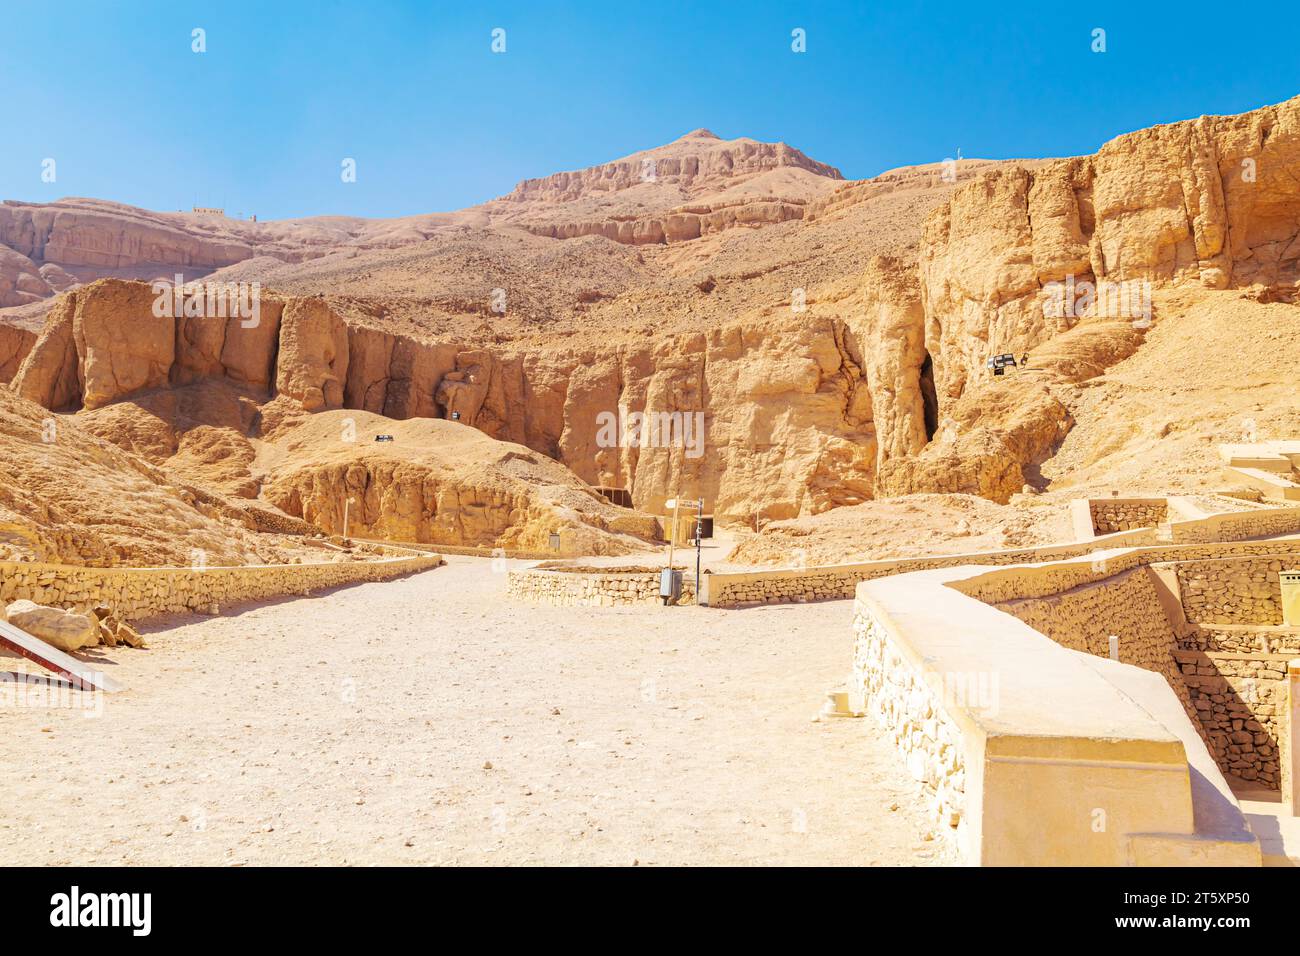 The famous Valley of the Kings is the location of the tombs of the pharaohs. Rocky gorge in the mountains. Luxor, Egypt – October 21, 2023 Stock Photo